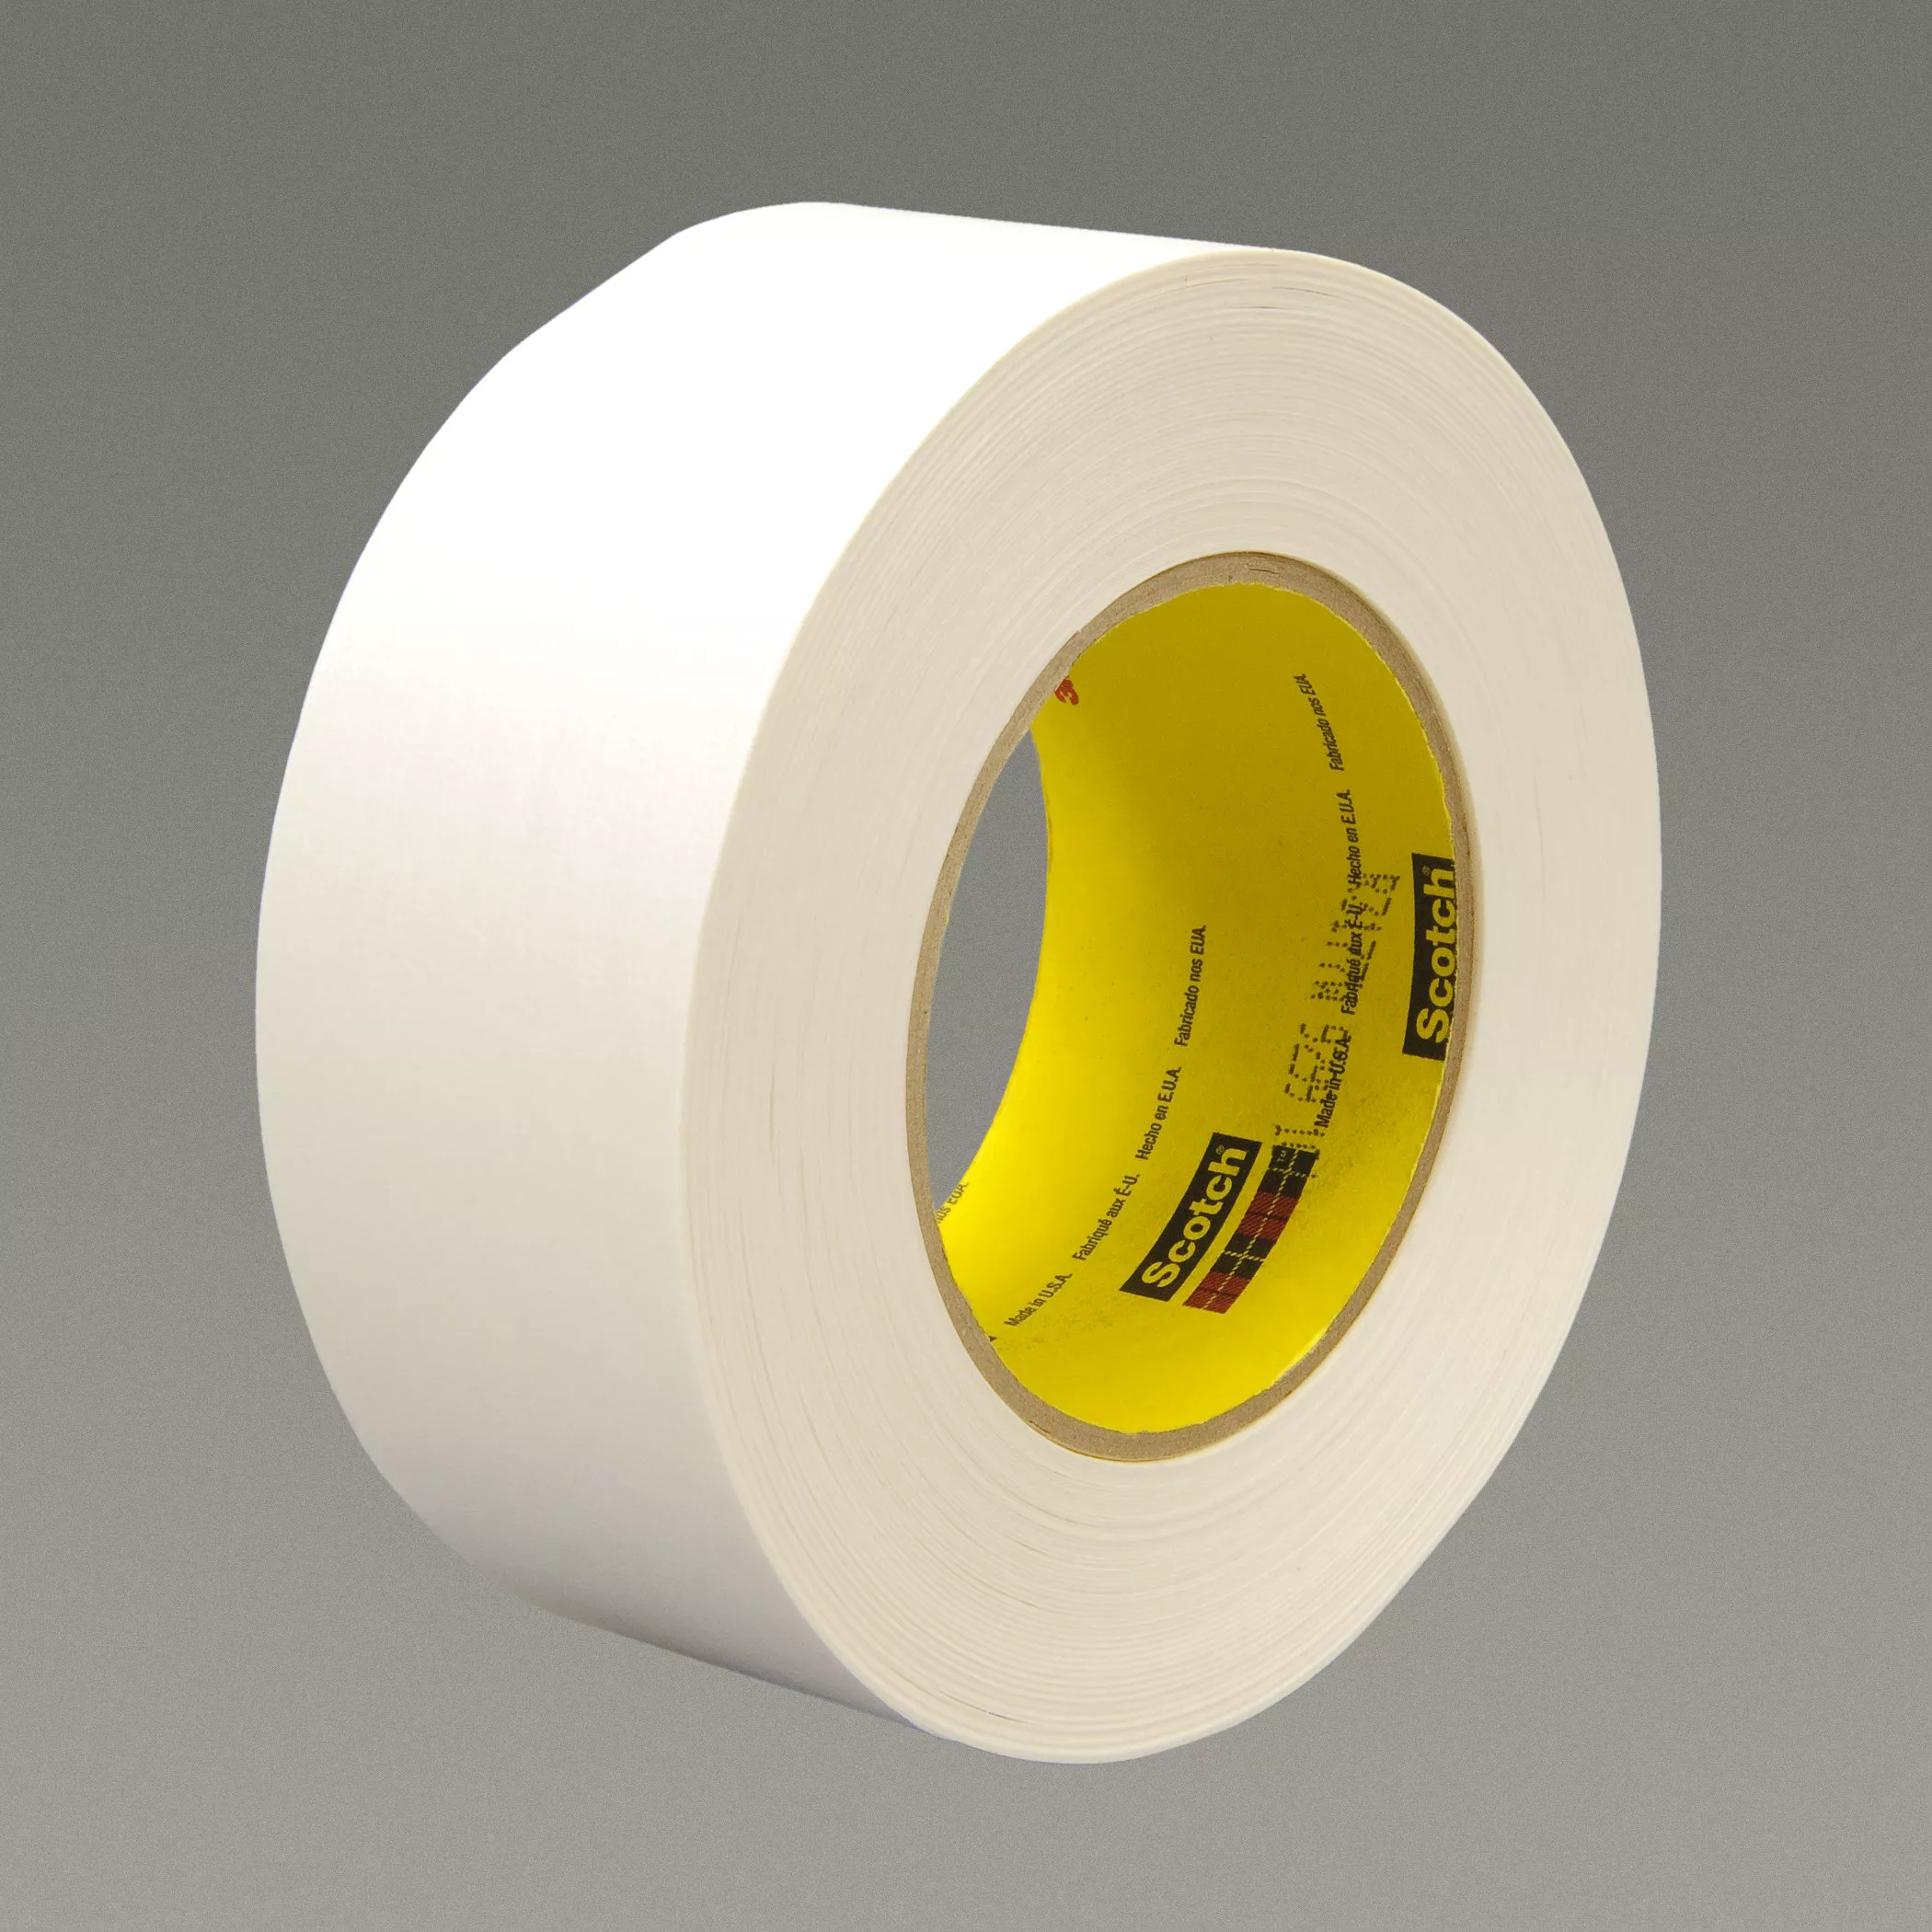 3M™ Repulpable Super Strength Single Coated Tape R3177, White, 48 mm
x
110 m, 7 mil, 6 Roll/Case